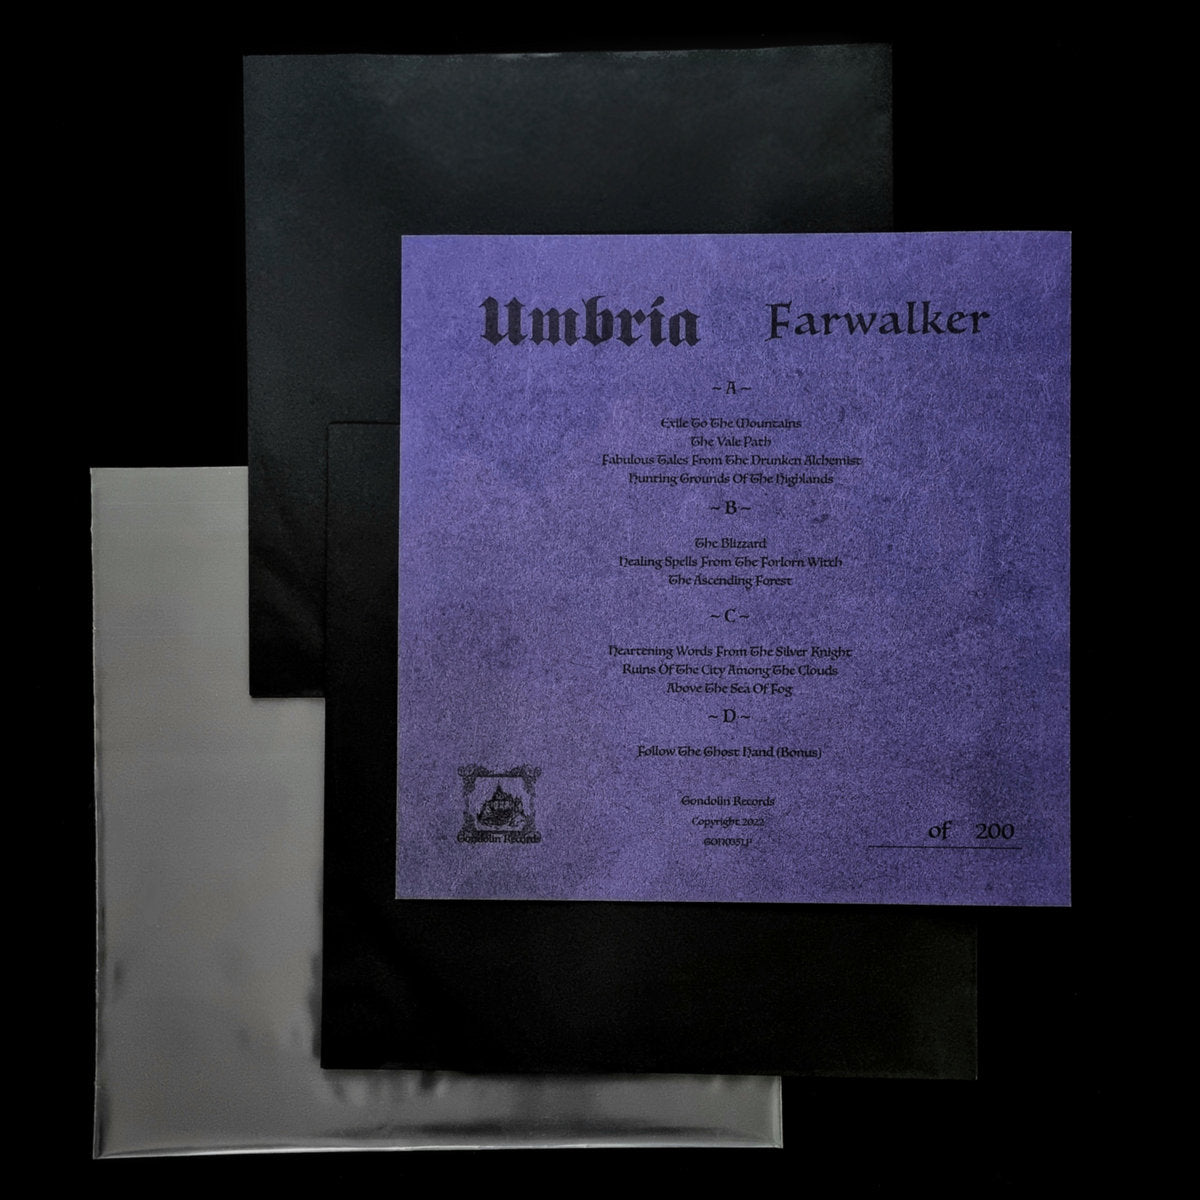 [SOLD OUT] UMBRIA "Farwalker" vinyl 2xLP (180g double LP, numbered, lim. 200)